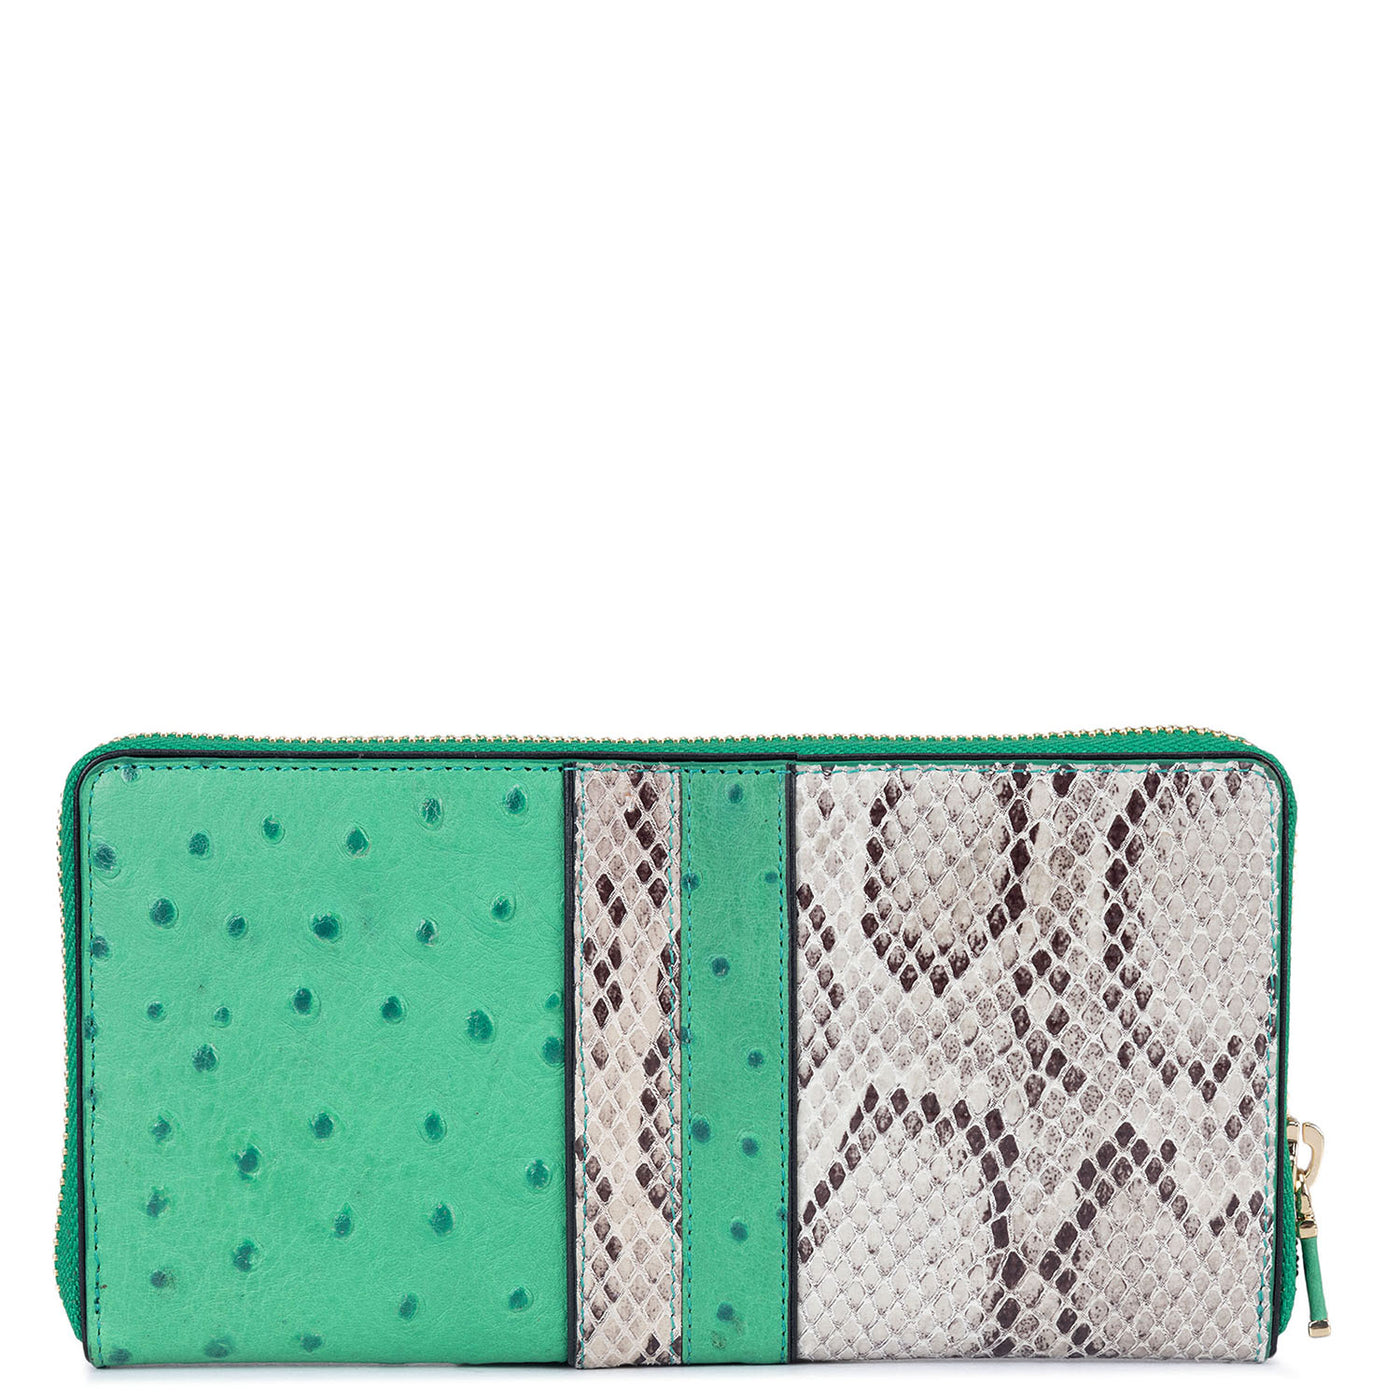 Ostrich Snake Leather Ladies Wallet - Green